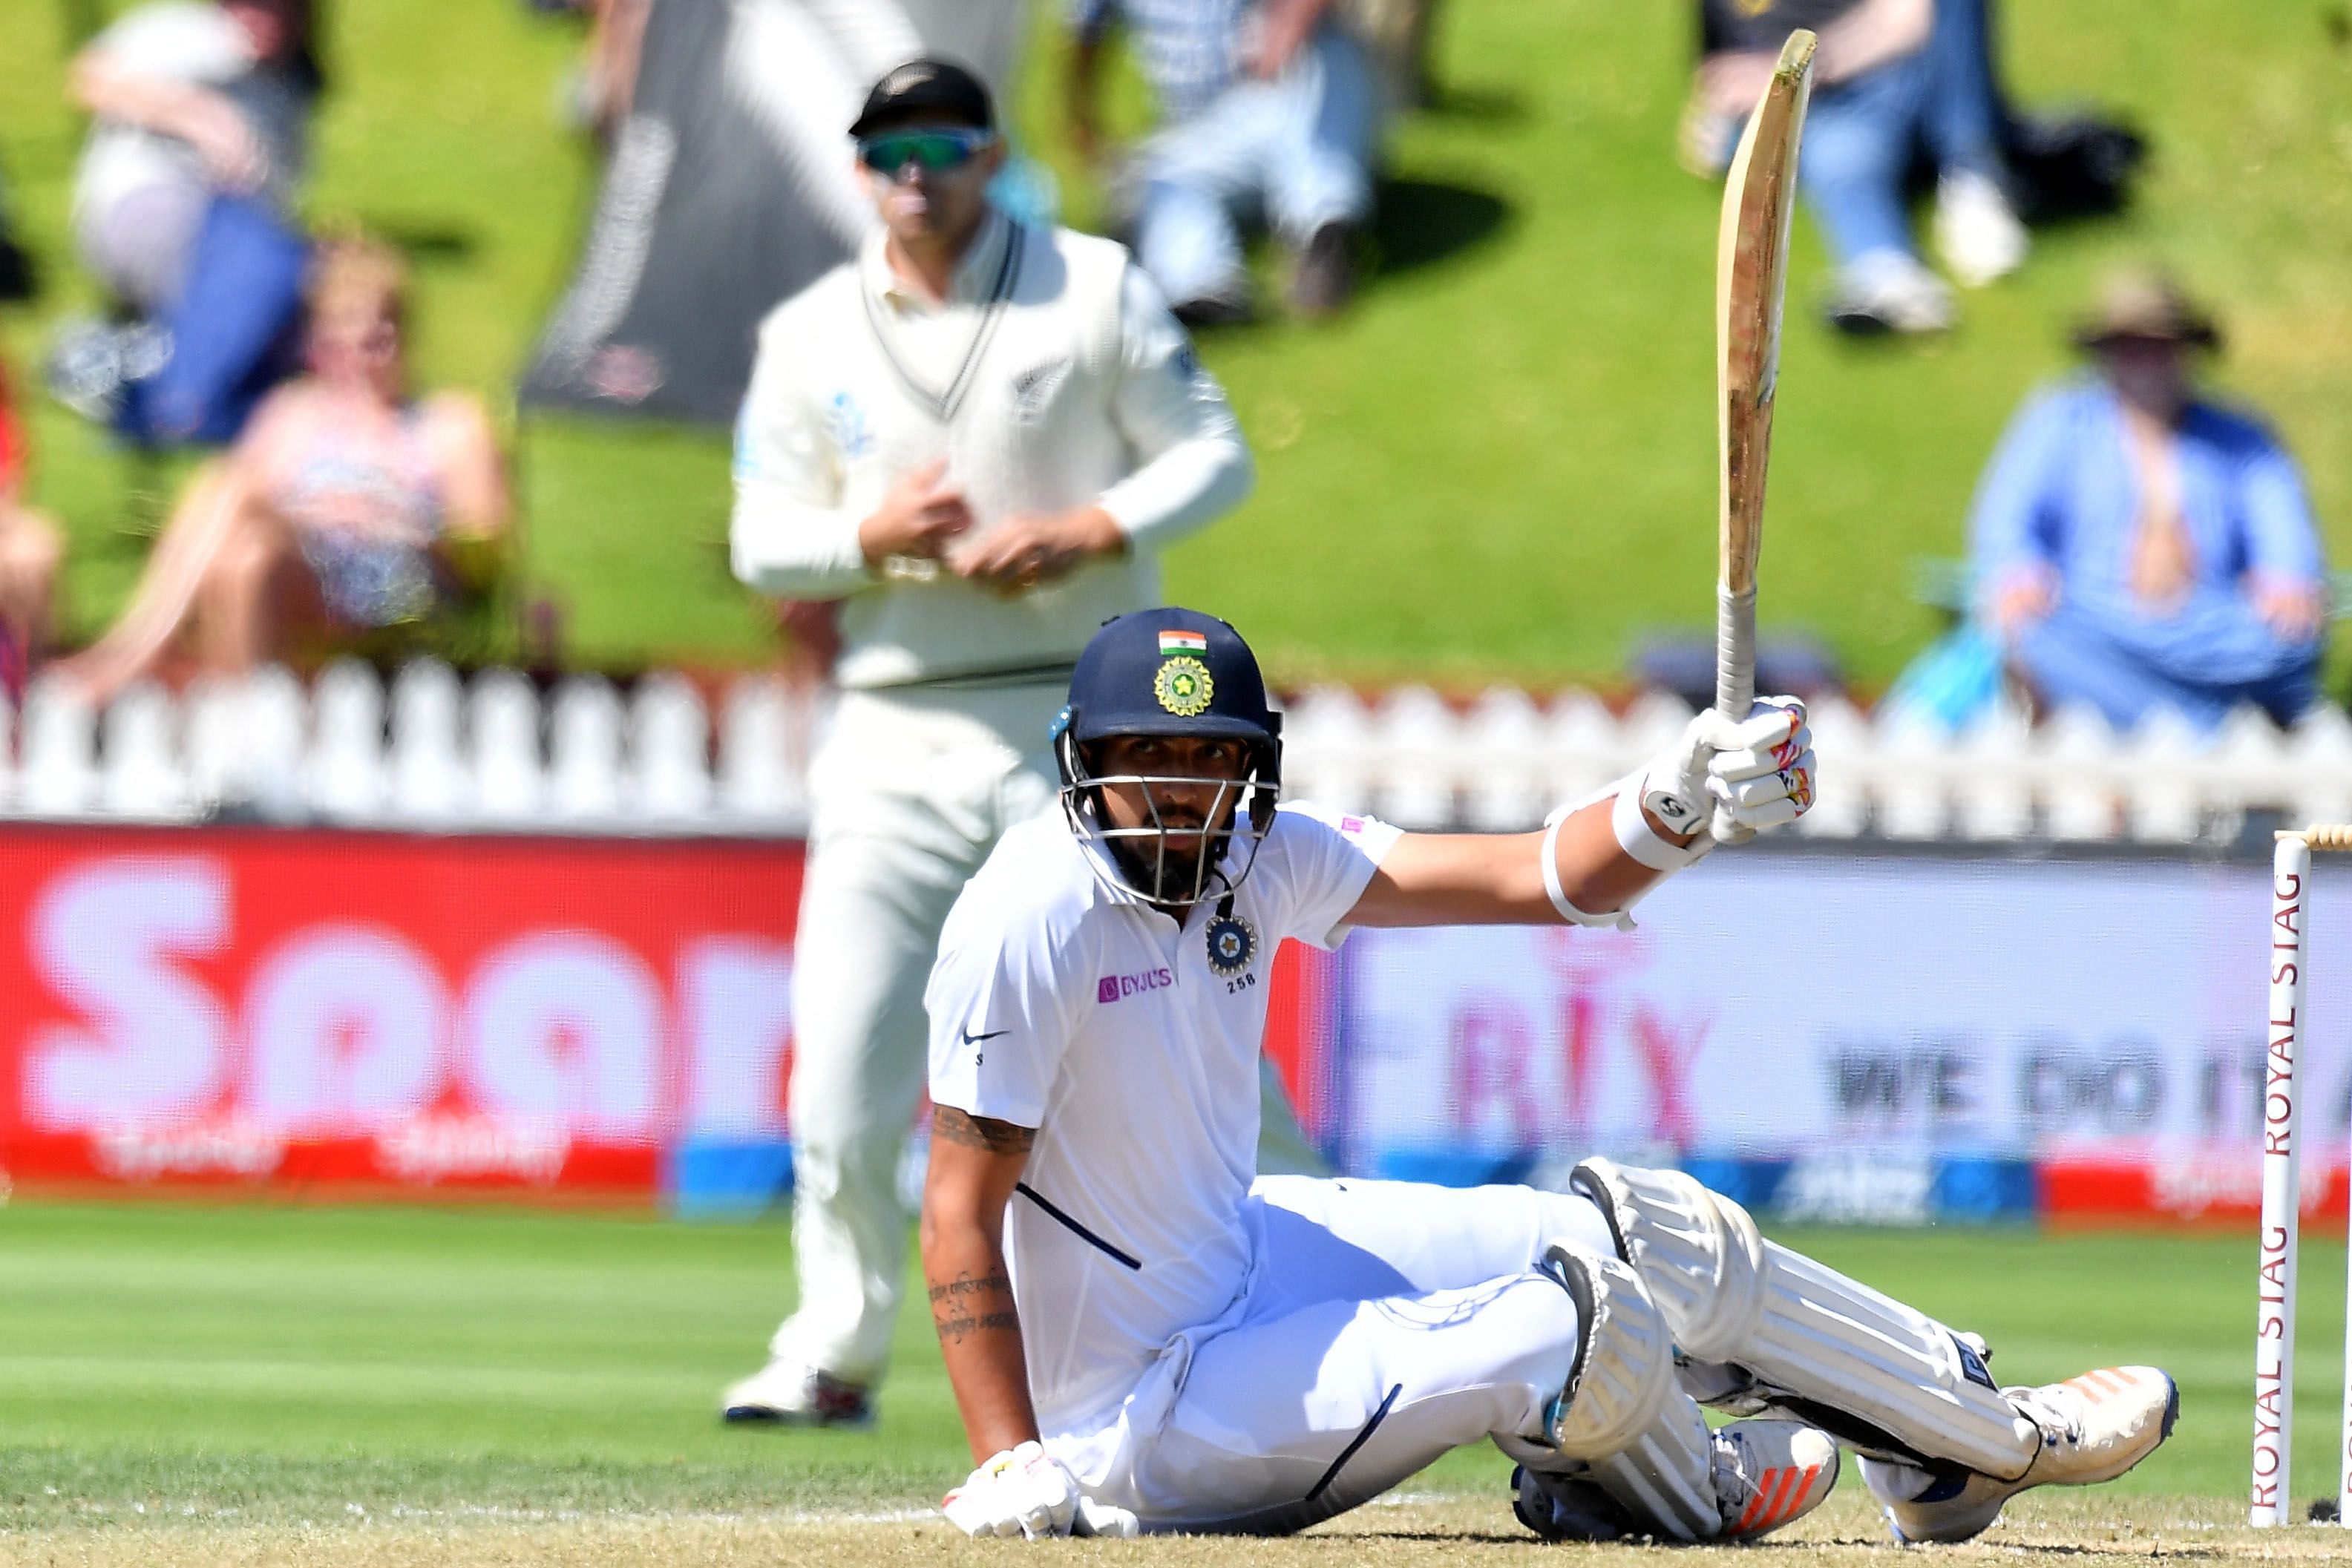 India's Ishant Sharma is knocked off his feet by the ball as he plays a shot during day four of the first Test cricket match between New Zealand and India at the Basin Reserve in Wellington. (AFP Photo)